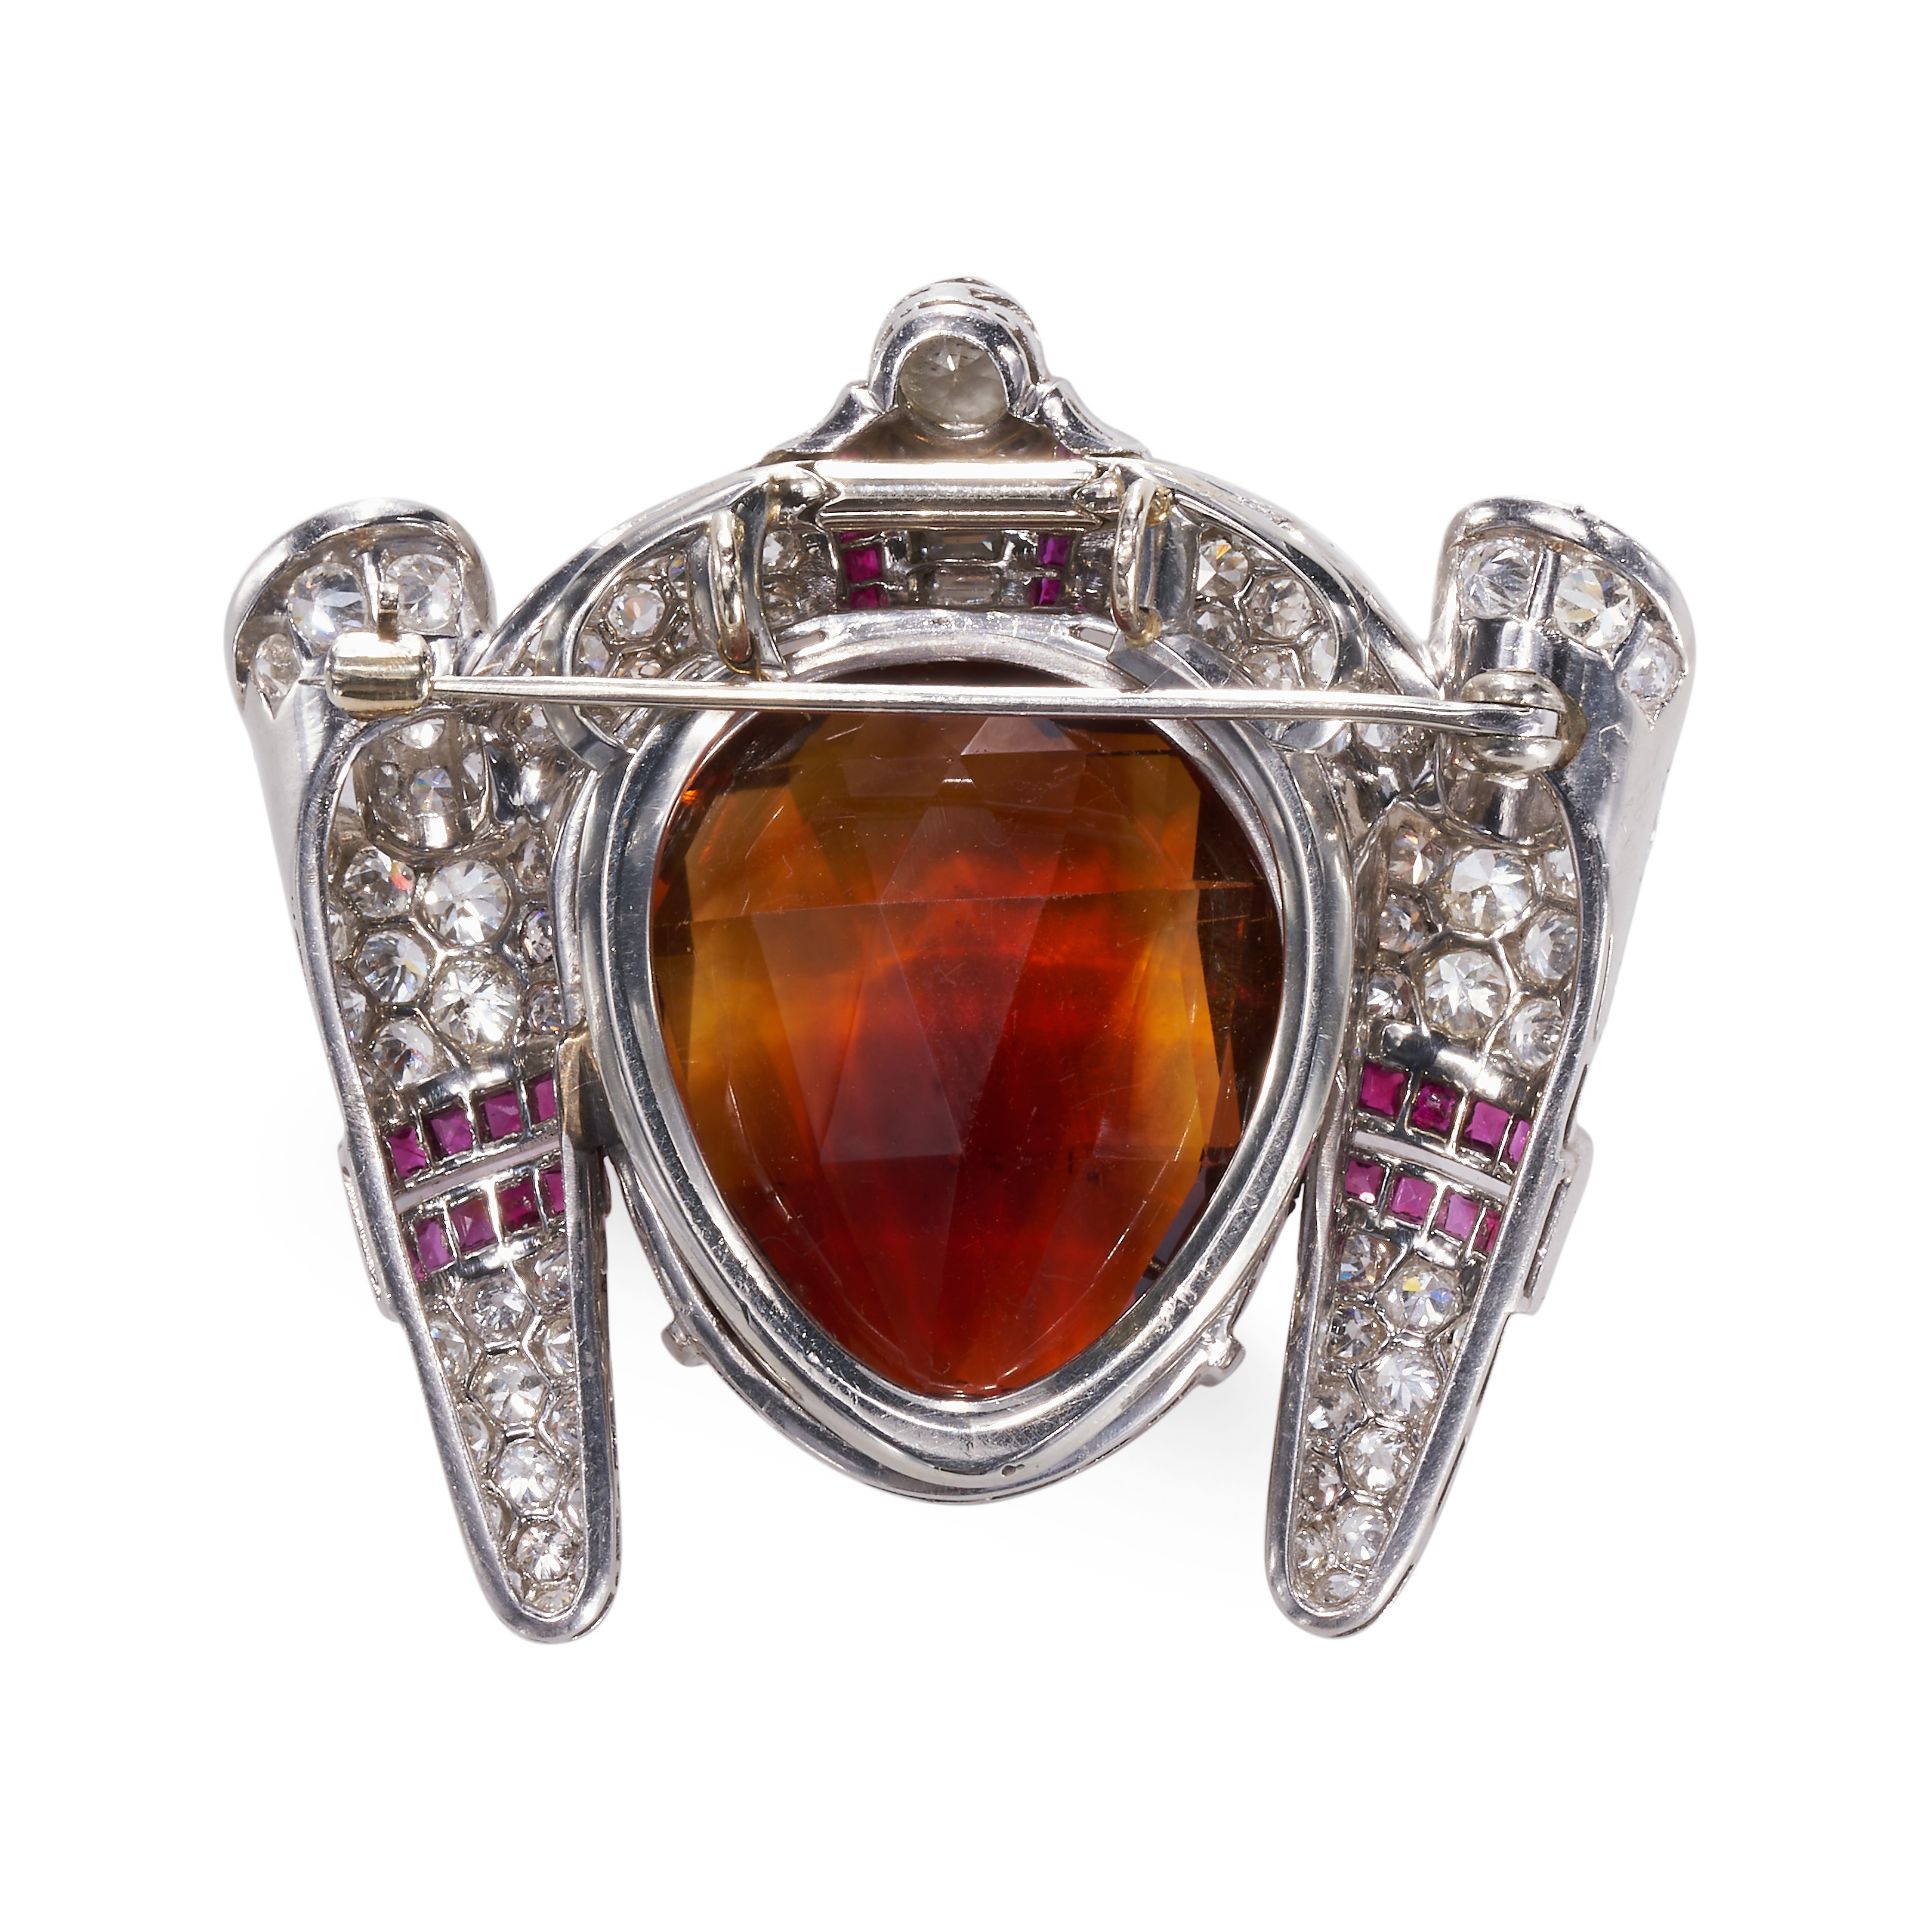 AN IMPRESIVE ART DECO, DIAMOND, RUBY AND CITRINE BROOCH. - Image 2 of 2